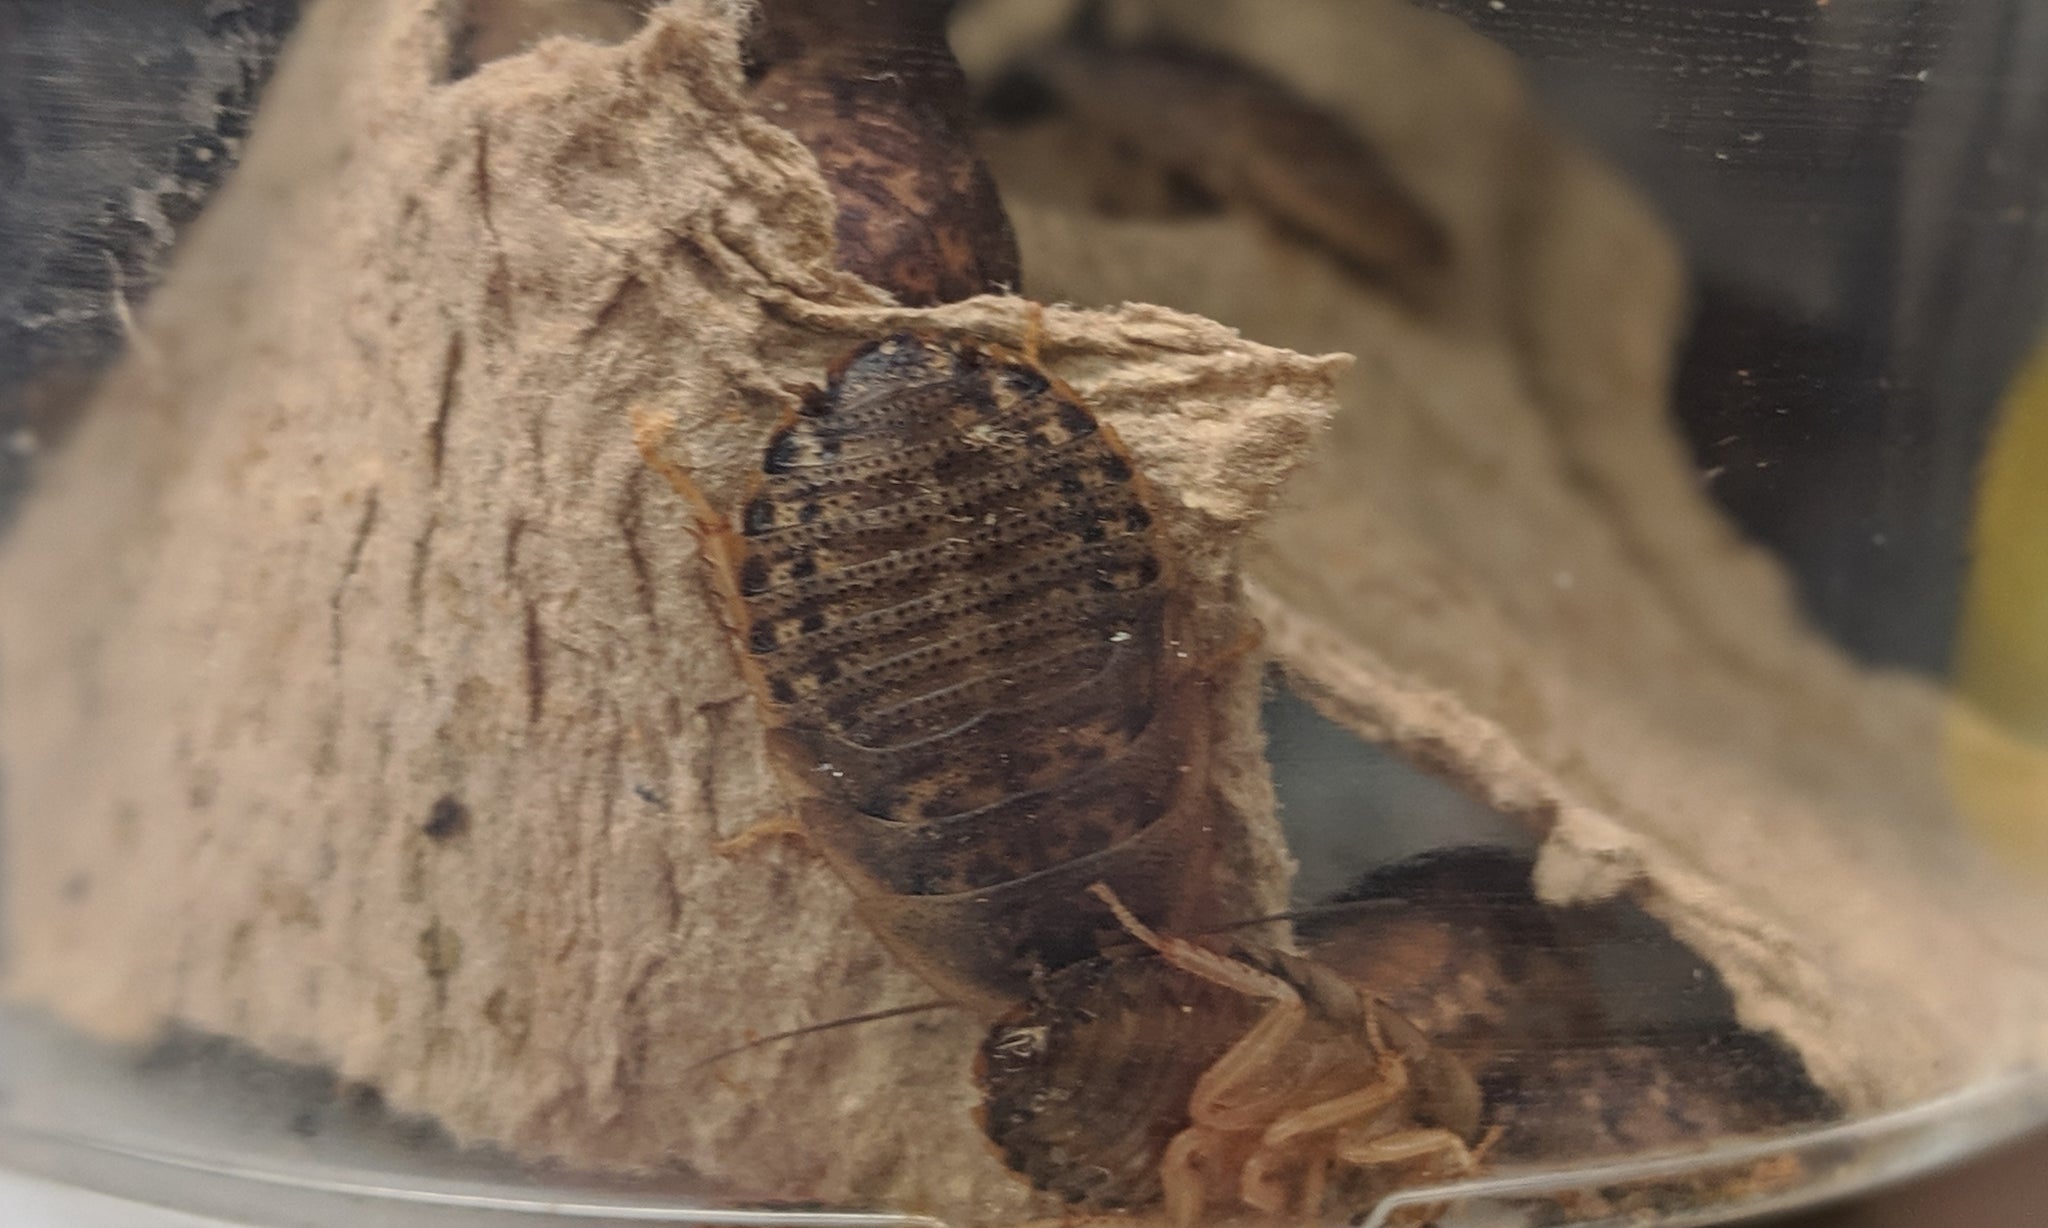 12 Live Dubia Roaches